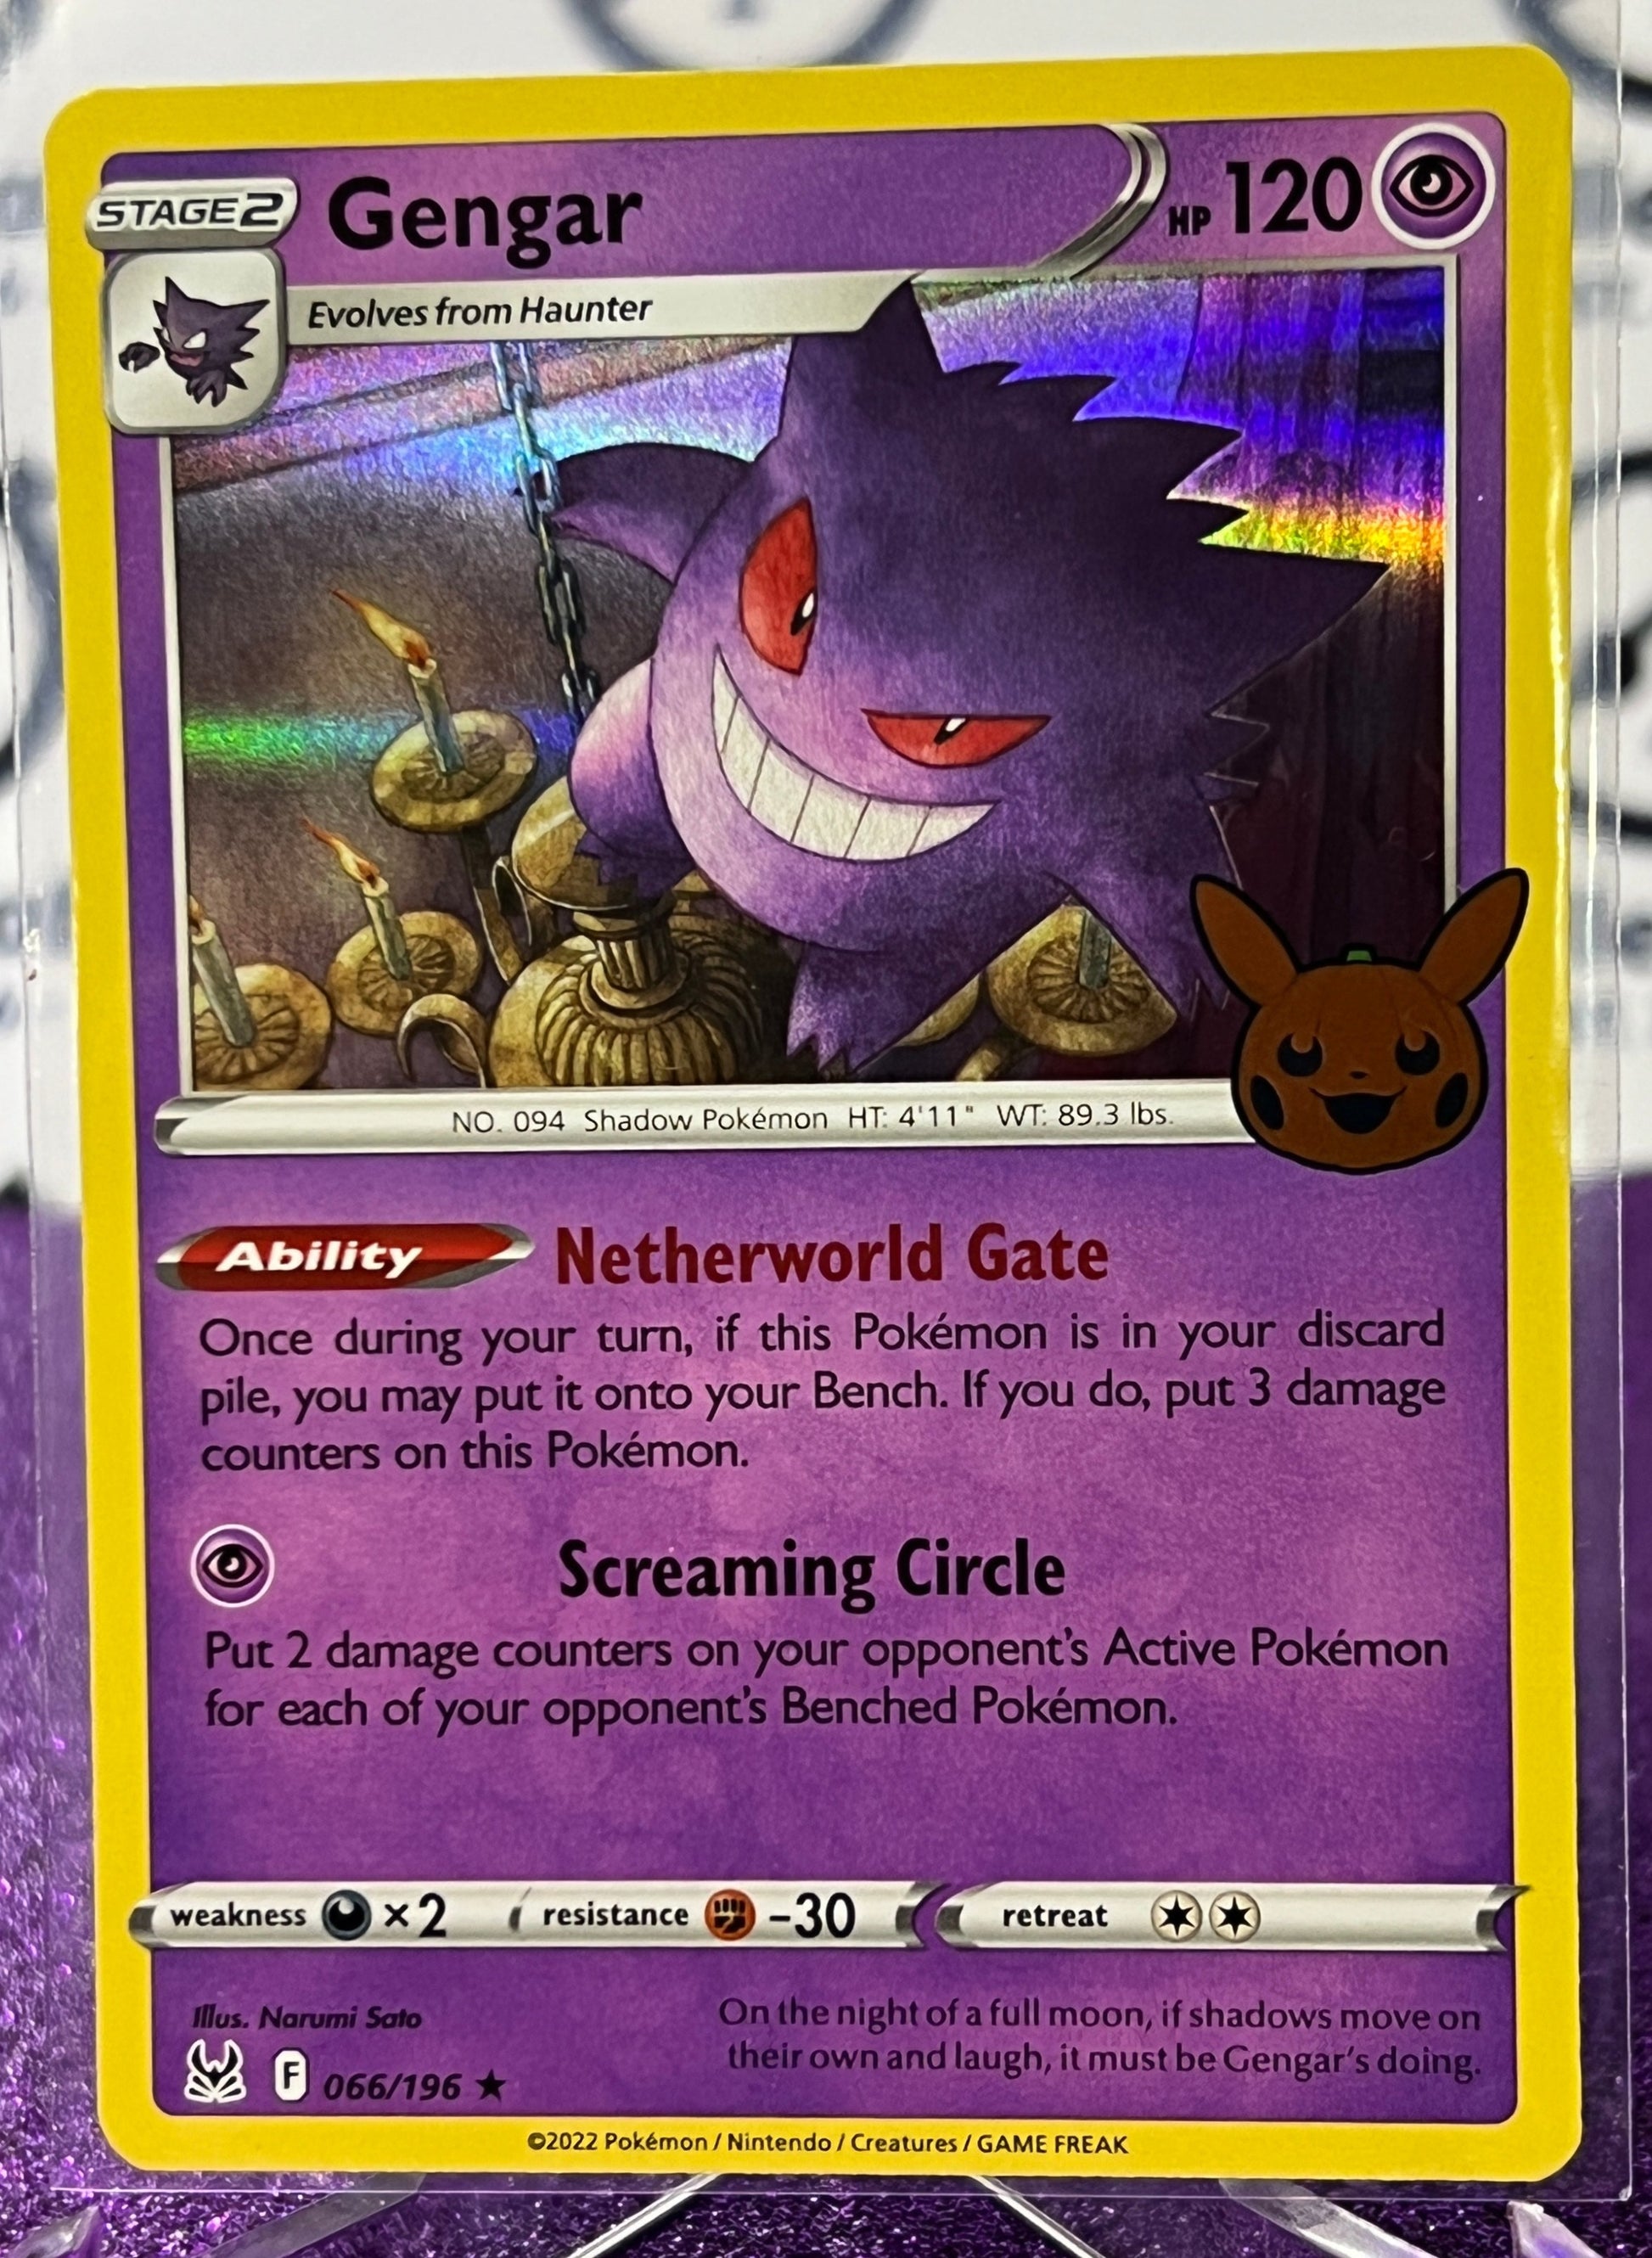 Pokemon Gengar Cards Celebrations PTCG 25th Anniversary of the US Version  Pikachu Flash Cards Game Toy Badge Box Halloween Gifts